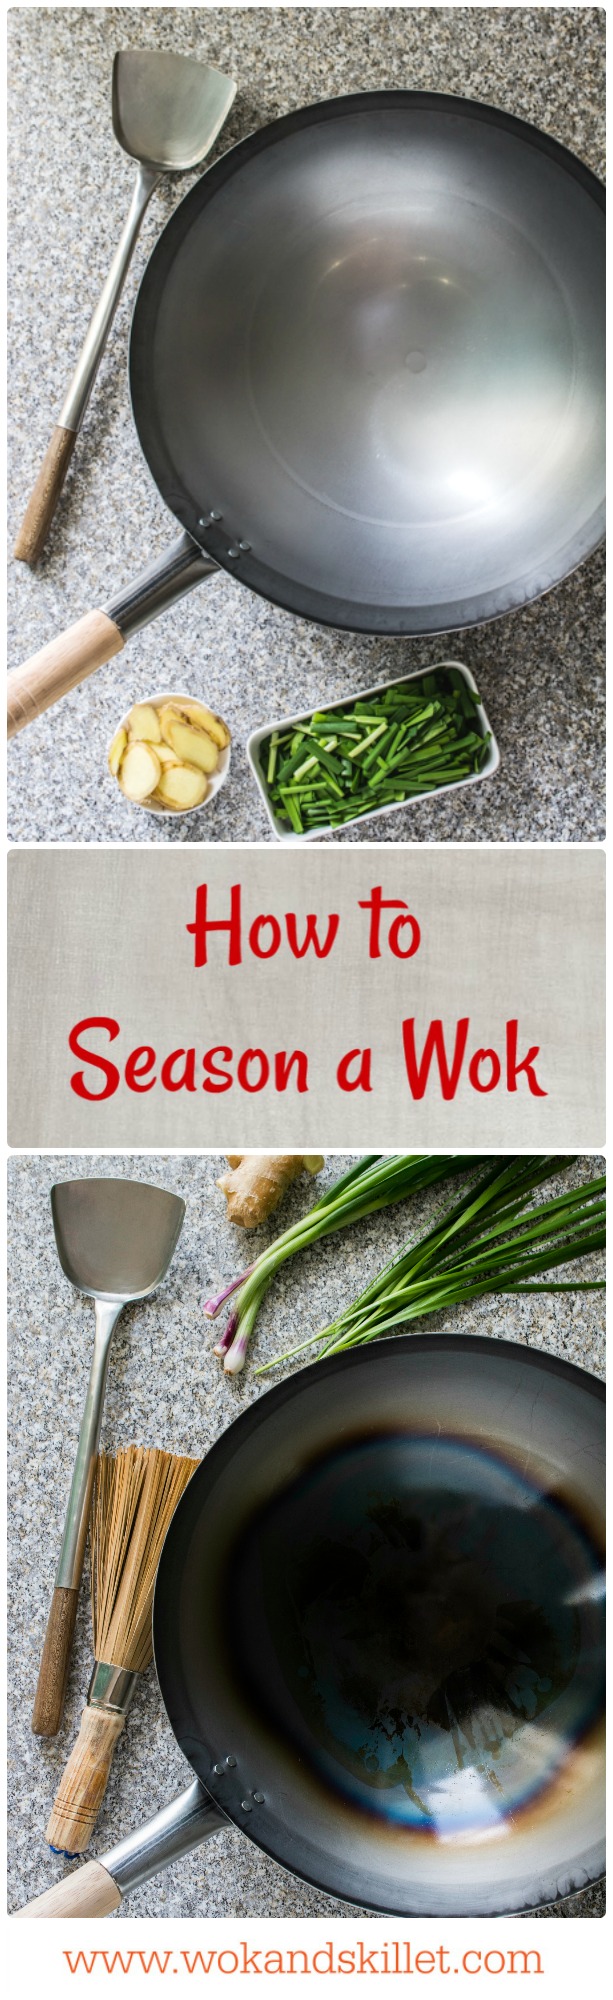 How to Season a New Wok. An easy step-by-step guide.